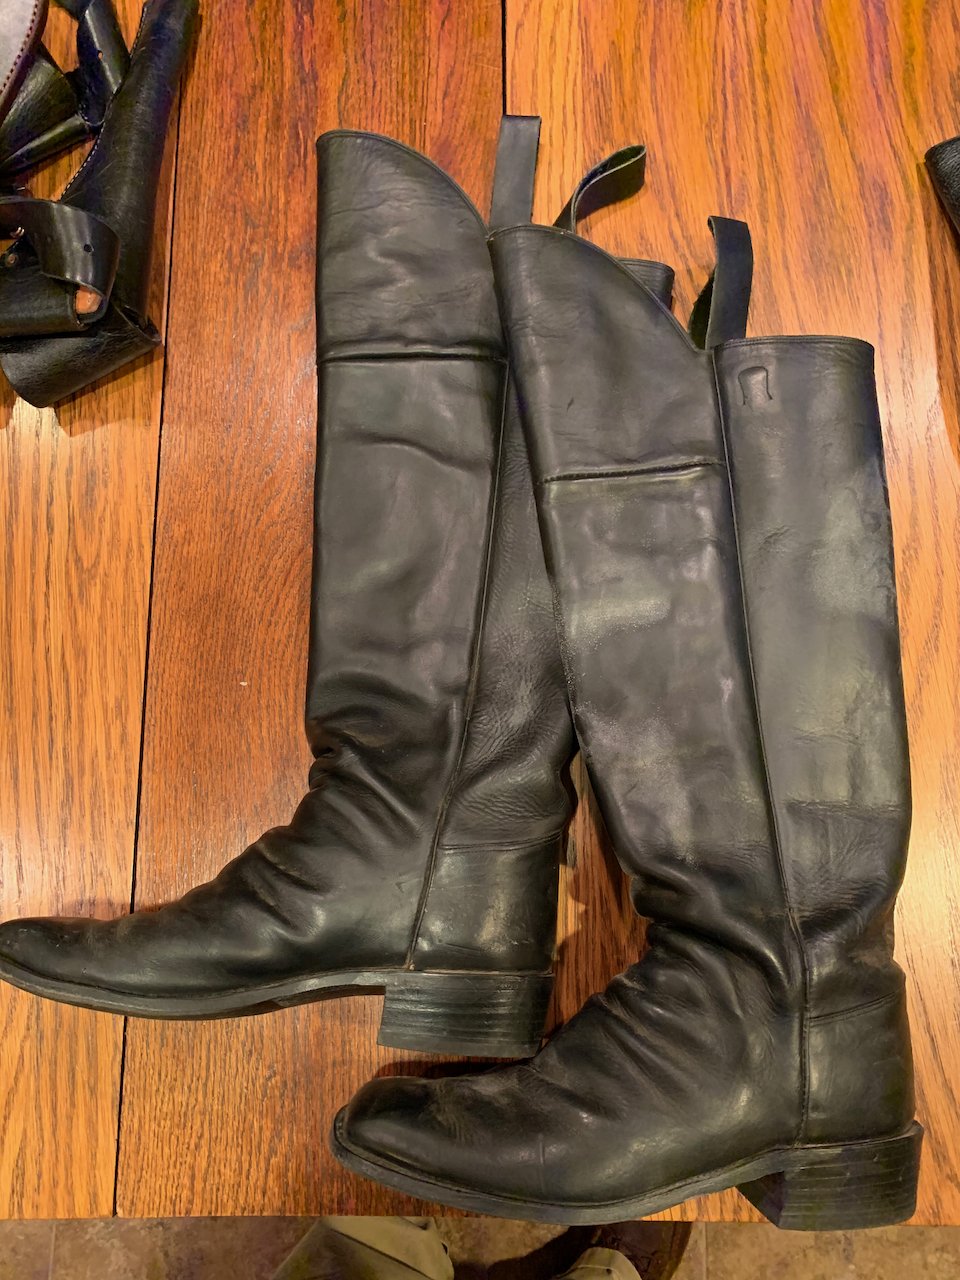 For Sale: 2 Pairs Cavalry Boots - SASS Wire Classifieds - SASS Wire Forum